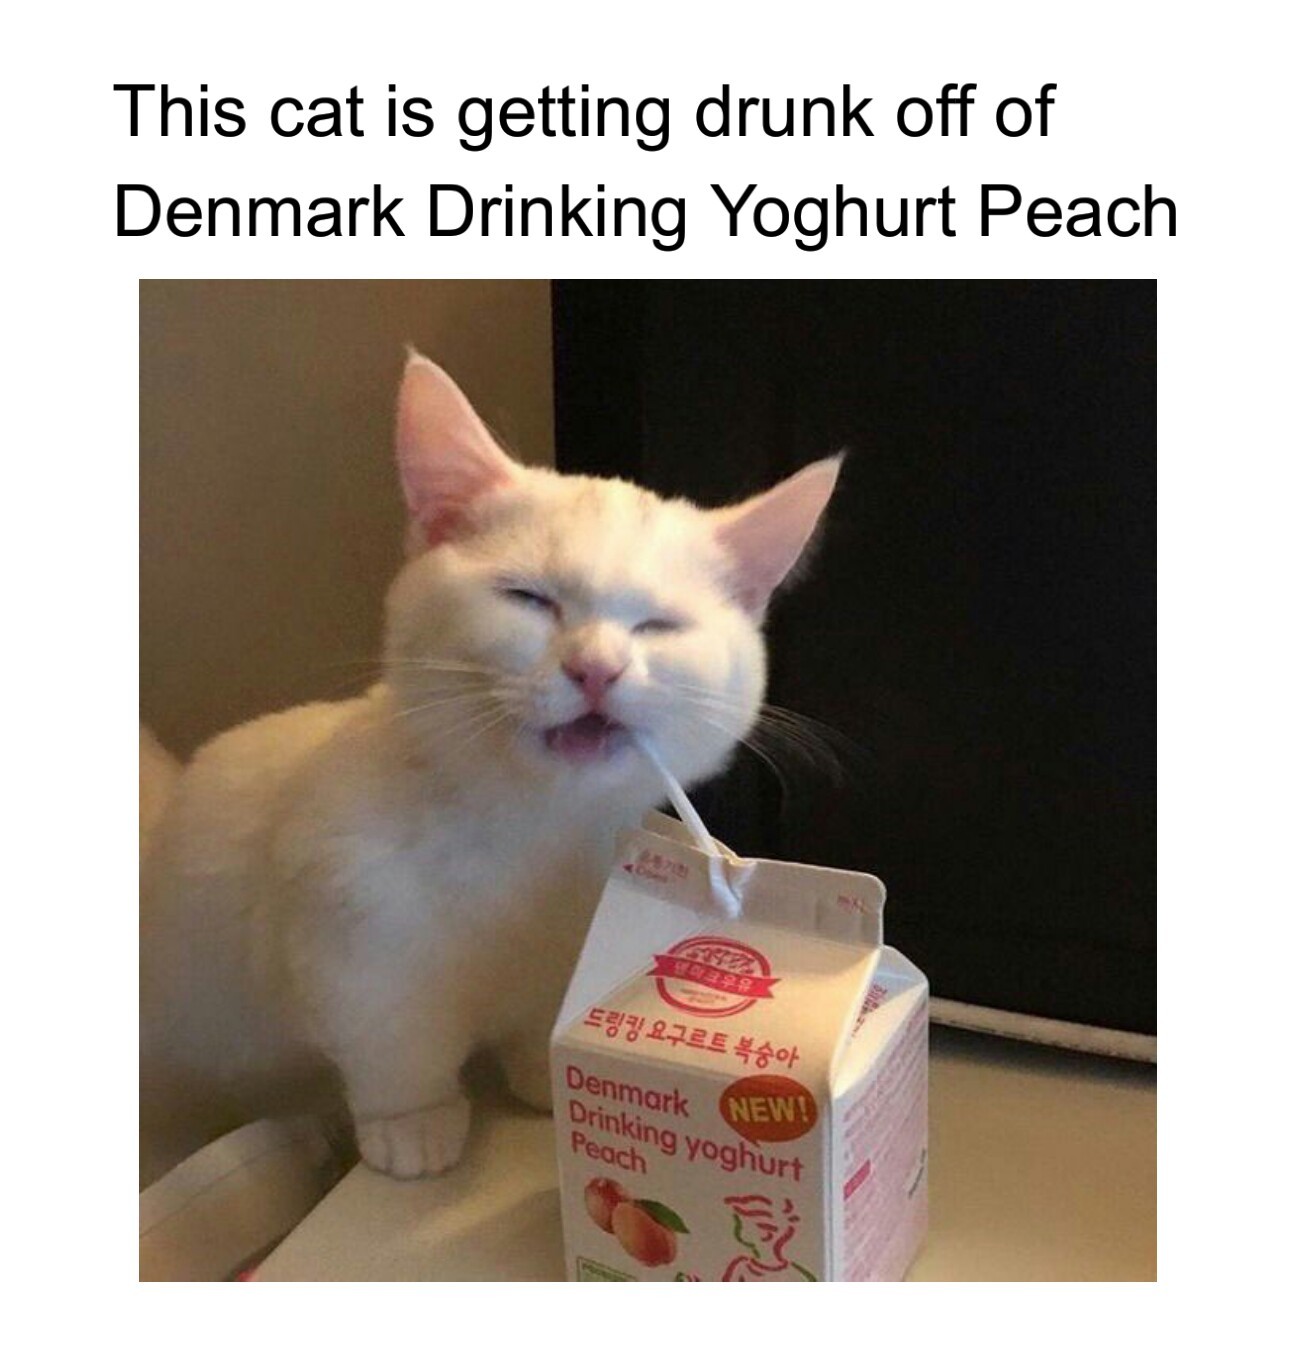 Reply to all comments with "Drink up catto" - meme